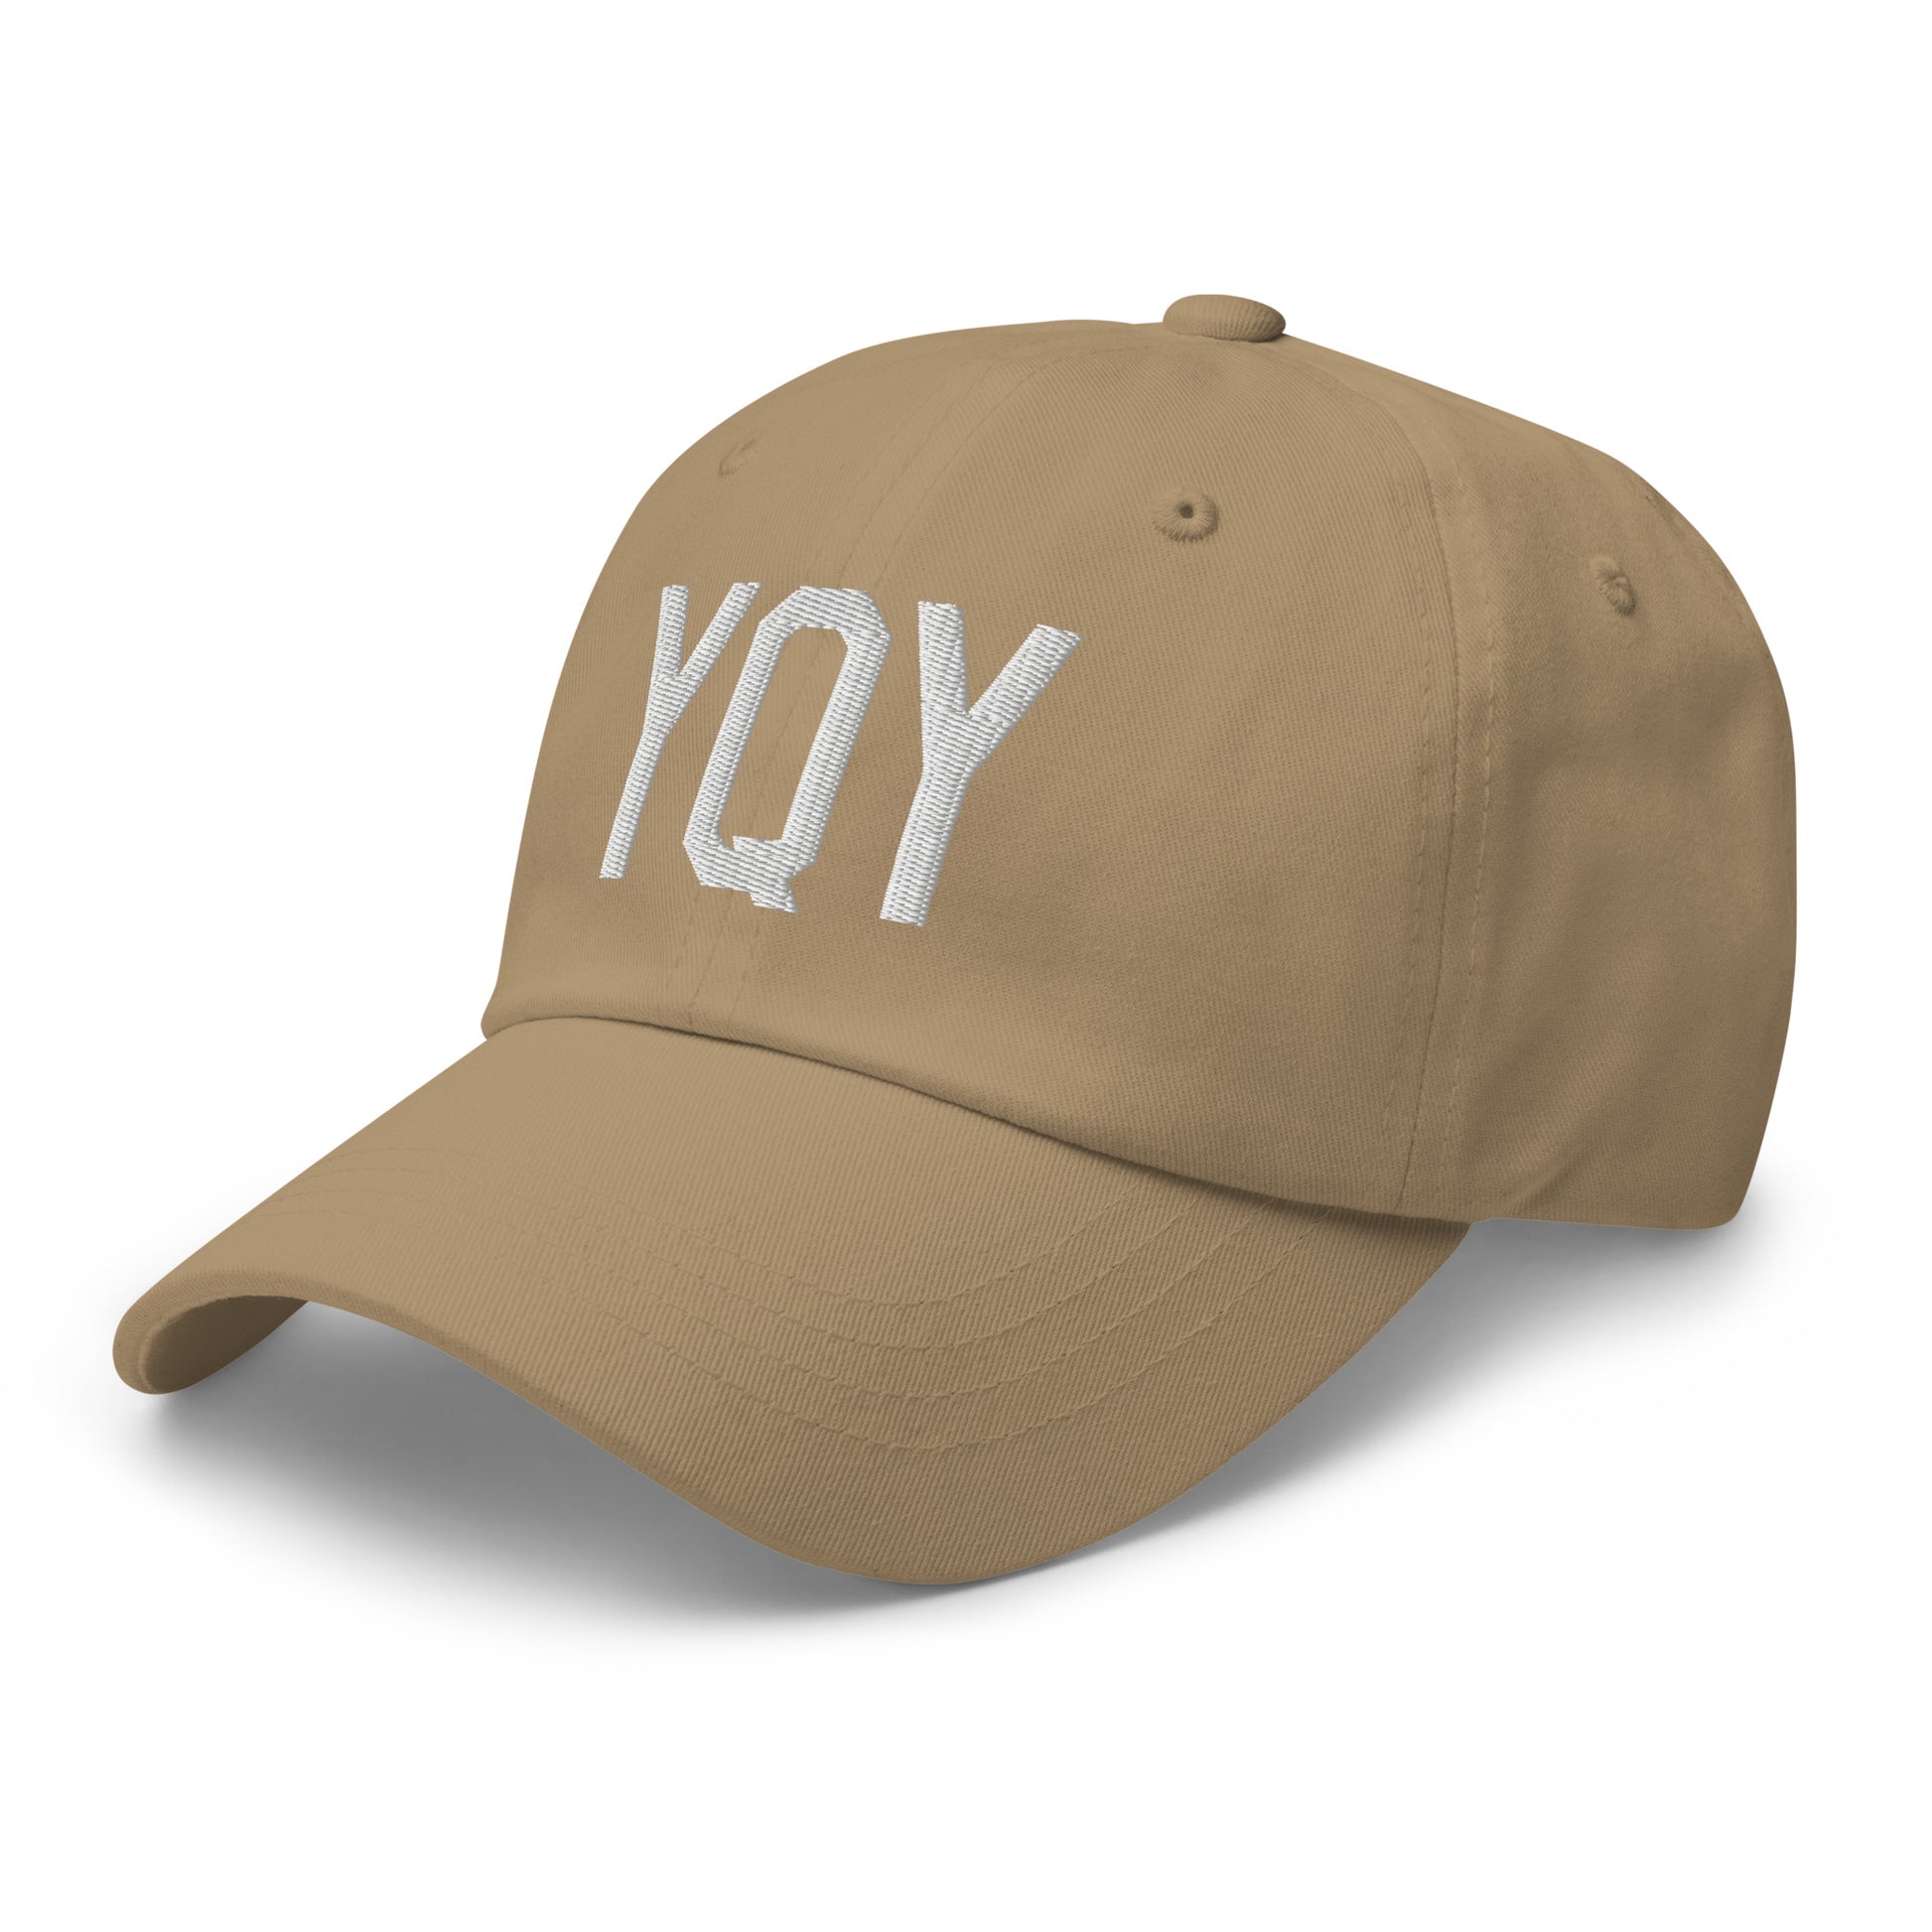 Airport Code Baseball Cap - White • YQY Sydney • YHM Designs - Image 24